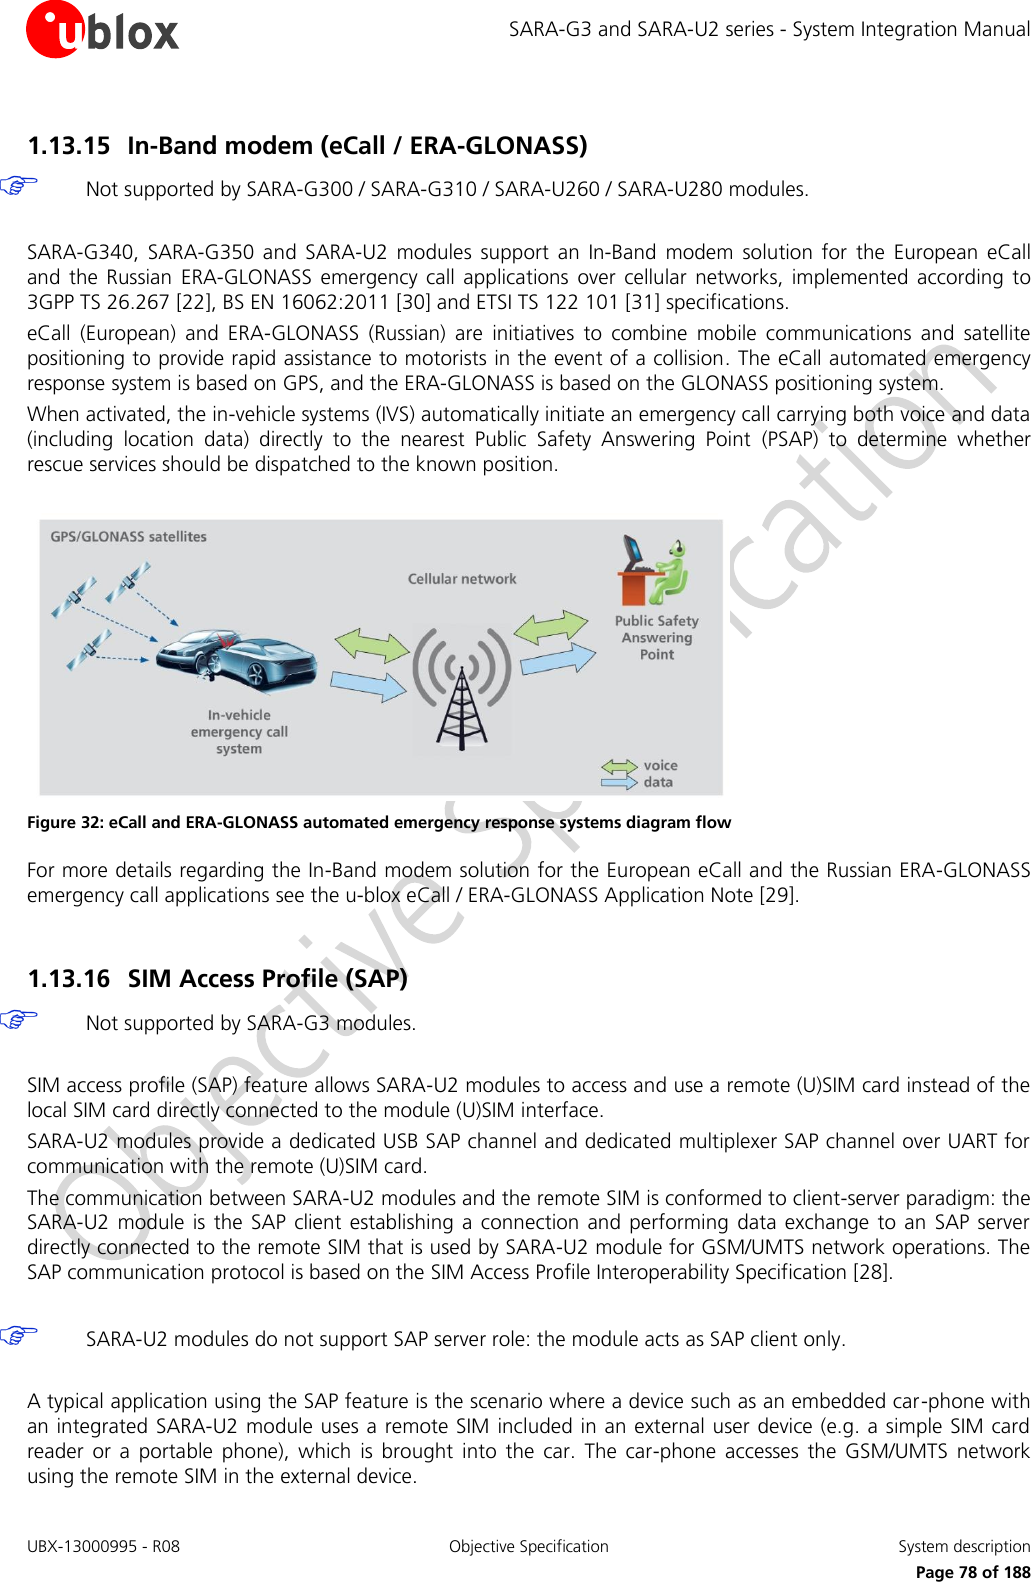 SARA-G3 and SARA-U2 series - System Integration Manual UBX-13000995 - R08  Objective Specification  System description     Page 78 of 188 1.13.15 In-Band modem (eCall / ERA-GLONASS)  Not supported by SARA-G300 / SARA-G310 / SARA-U260 / SARA-U280 modules.  SARA-G340,  SARA-G350  and  SARA-U2  modules  support  an In-Band  modem  solution  for  the  European  eCall and  the  Russian  ERA-GLONASS  emergency  call applications  over cellular  networks,  implemented  according  to 3GPP TS 26.267 [22], BS EN 16062:2011 [30] and ETSI TS 122 101 [31] specifications. eCall  (European)  and  ERA-GLONASS  (Russian)  are  initiatives  to  combine  mobile  communications  and  satellite positioning to provide rapid assistance to motorists in the event of a collision. The eCall automated emergency response system is based on GPS, and the ERA-GLONASS is based on the GLONASS positioning system. When activated, the in-vehicle systems (IVS) automatically initiate an emergency call carrying both voice and data (including  location  data)  directly  to  the  nearest  Public  Safety  Answering  Point  (PSAP)  to  determine  whether rescue services should be dispatched to the known position.   Figure 32: eCall and ERA-GLONASS automated emergency response systems diagram flow For more details regarding the In-Band modem solution for the European eCall and the Russian ERA-GLONASS emergency call applications see the u-blox eCall / ERA-GLONASS Application Note [29].  1.13.16 SIM Access Profile (SAP)  Not supported by SARA-G3 modules.  SIM access profile (SAP) feature allows SARA-U2 modules to access and use a remote (U)SIM card instead of the local SIM card directly connected to the module (U)SIM interface. SARA-U2 modules provide a dedicated USB SAP channel and dedicated multiplexer SAP channel over UART for communication with the remote (U)SIM card. The communication between SARA-U2 modules and the remote SIM is conformed to client-server paradigm: the SARA-U2  module  is  the SAP  client establishing a  connection and performing  data  exchange to an SAP server directly connected to the remote SIM that is used by SARA-U2 module for GSM/UMTS network operations. The SAP communication protocol is based on the SIM Access Profile Interoperability Specification [28].   SARA-U2 modules do not support SAP server role: the module acts as SAP client only.  A typical application using the SAP feature is the scenario where a device such as an embedded car-phone with an integrated SARA-U2 module uses a remote SIM  included in an external user device (e.g. a simple SIM card reader  or  a  portable  phone),  which  is  brought  into  the  car.  The  car-phone  accesses the  GSM/UMTS  network using the remote SIM in the external device. 